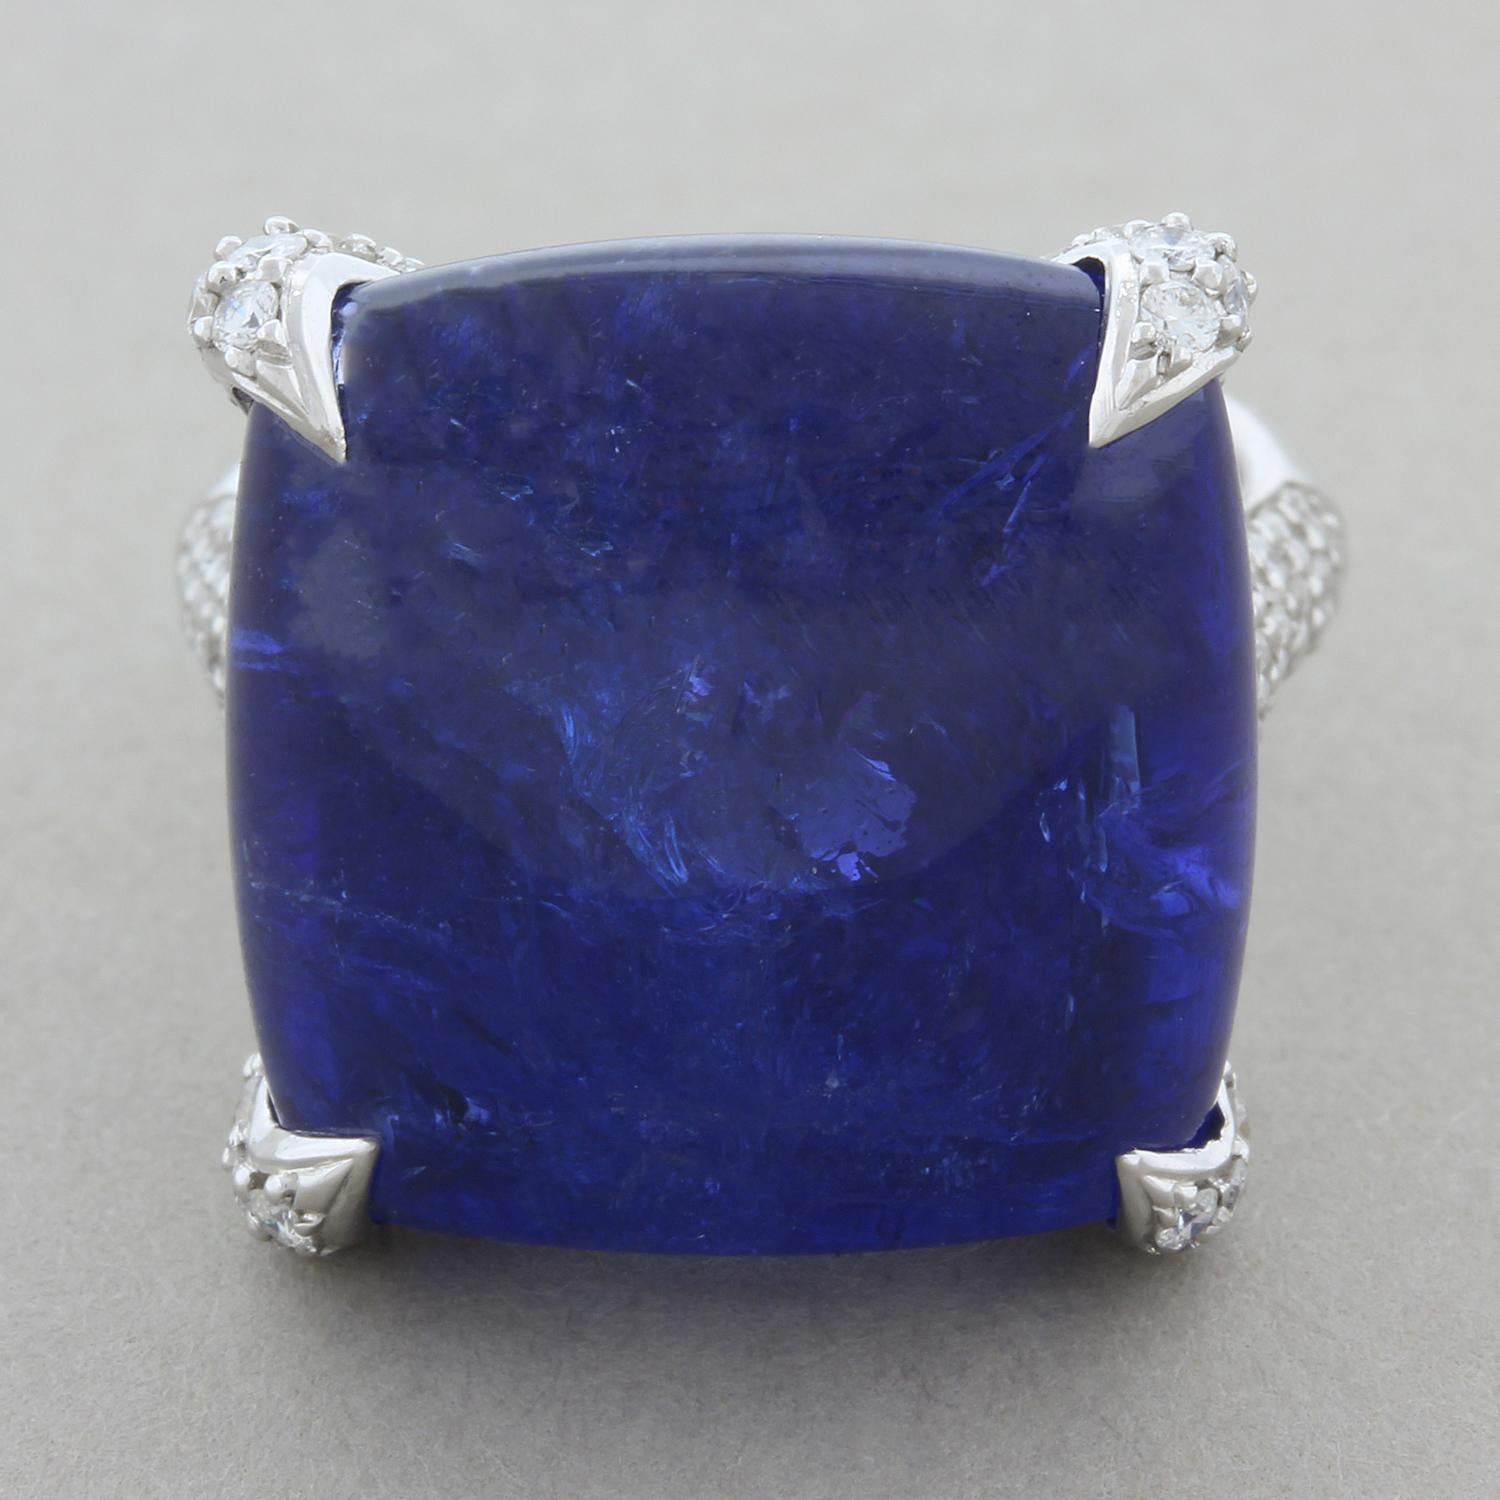 An exquisite ring featuring a 28.42 carat sugarloaf tanzanite with a deep purplish-blue color. The smooth tanzanite is accented by 3.20 carats of VS quality colorless diamonds wrapping around the shank and upwards onto the sexy claw prong settings.